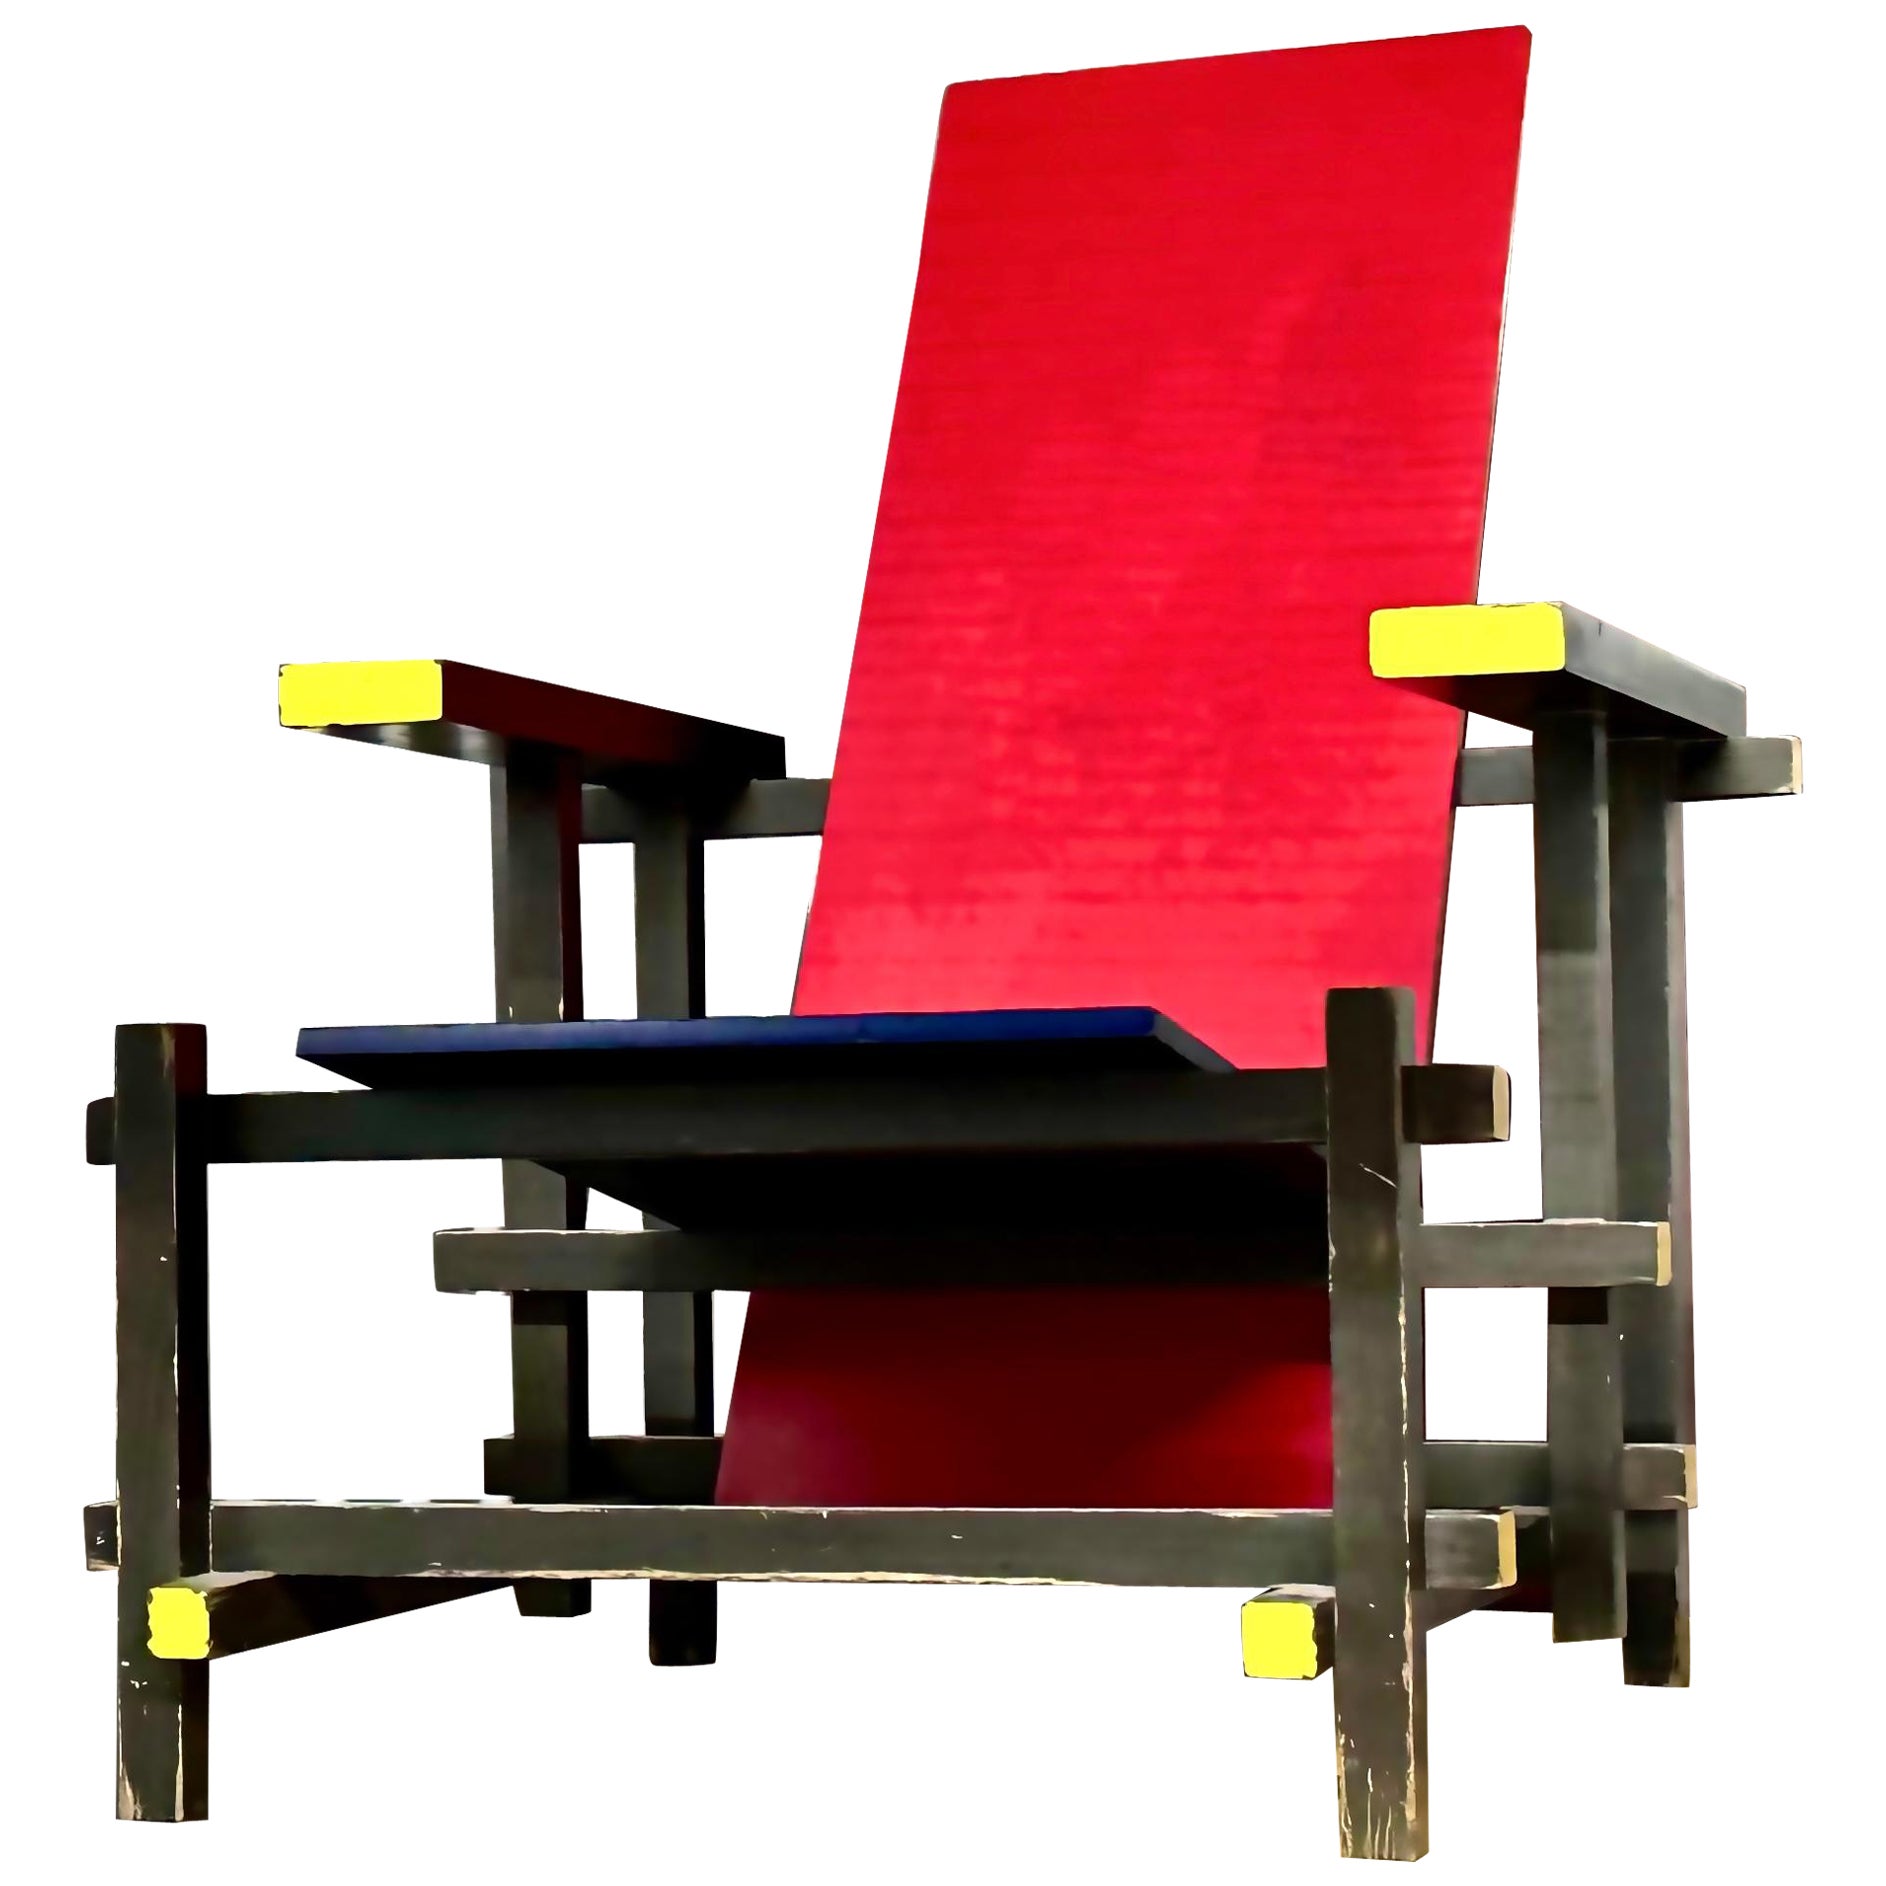 Red Blue Chair by Gerrit Rietveld for Cassina, Italy, De Stijl Modern, 1918 For Sale